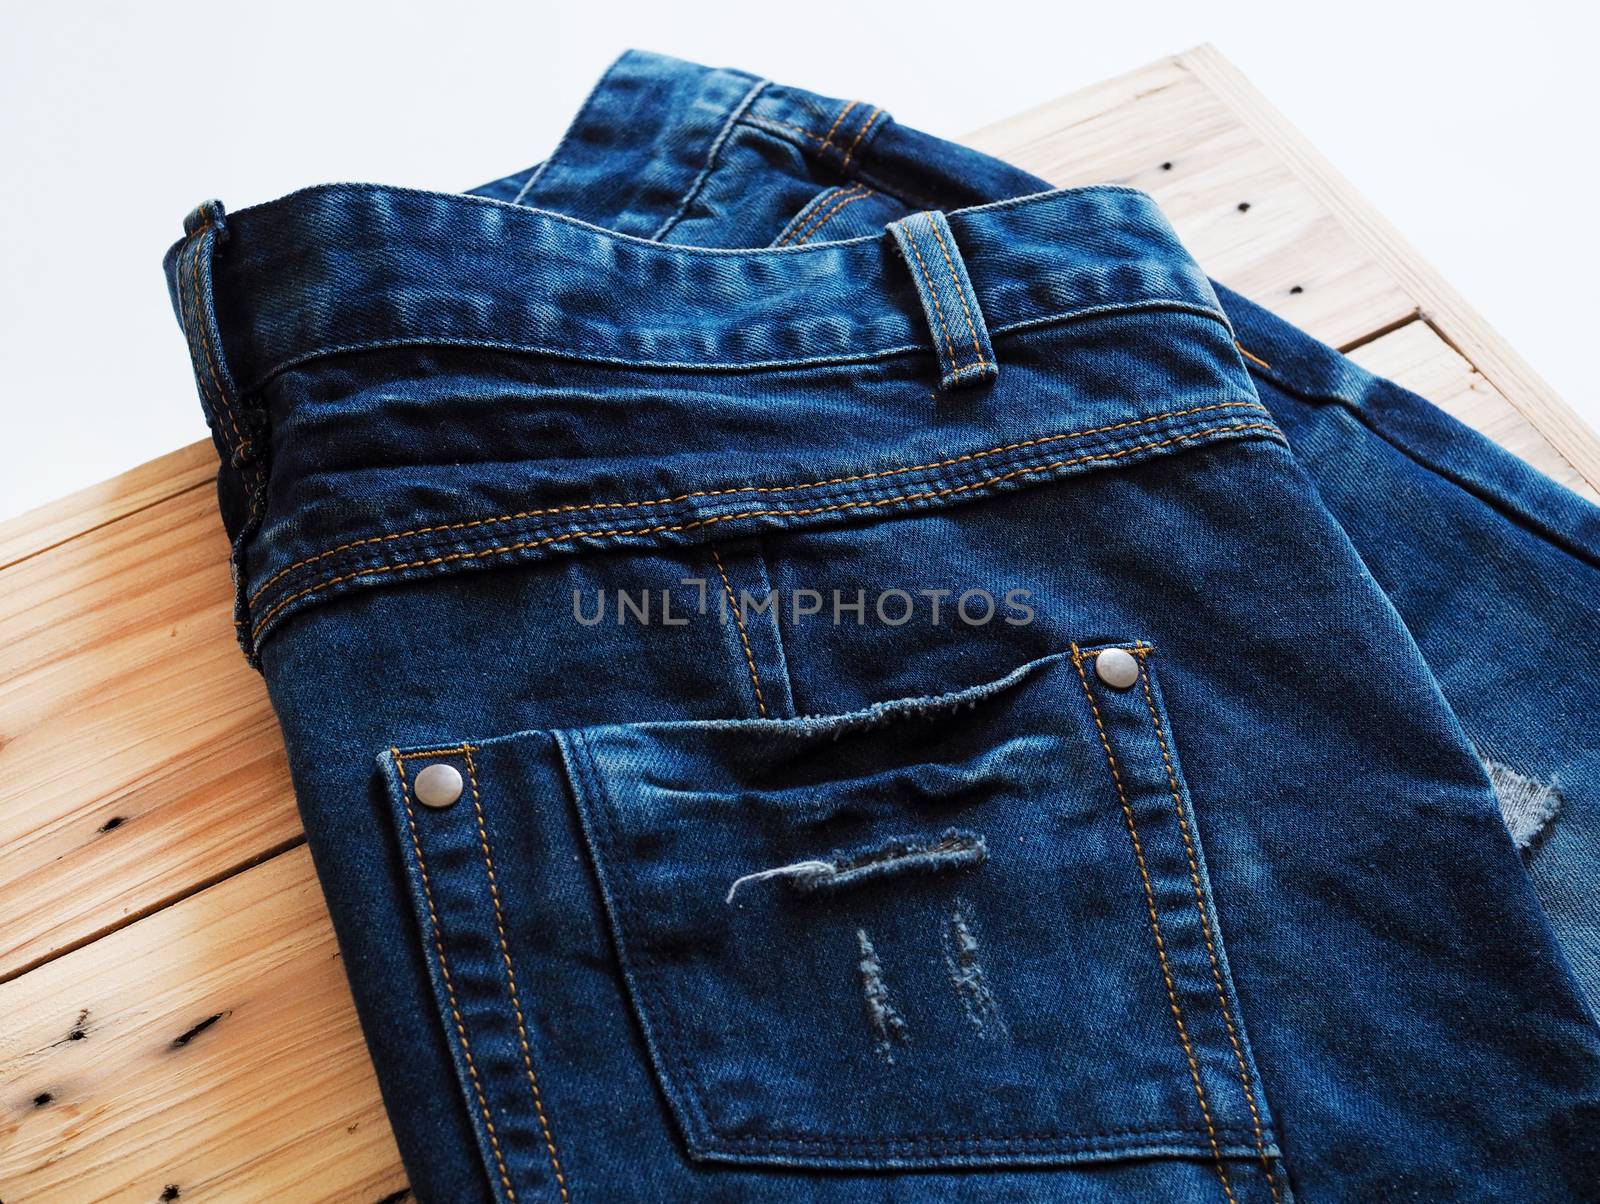 Denim blue jeans trouser fashion placed on wooden boxes by kittima05